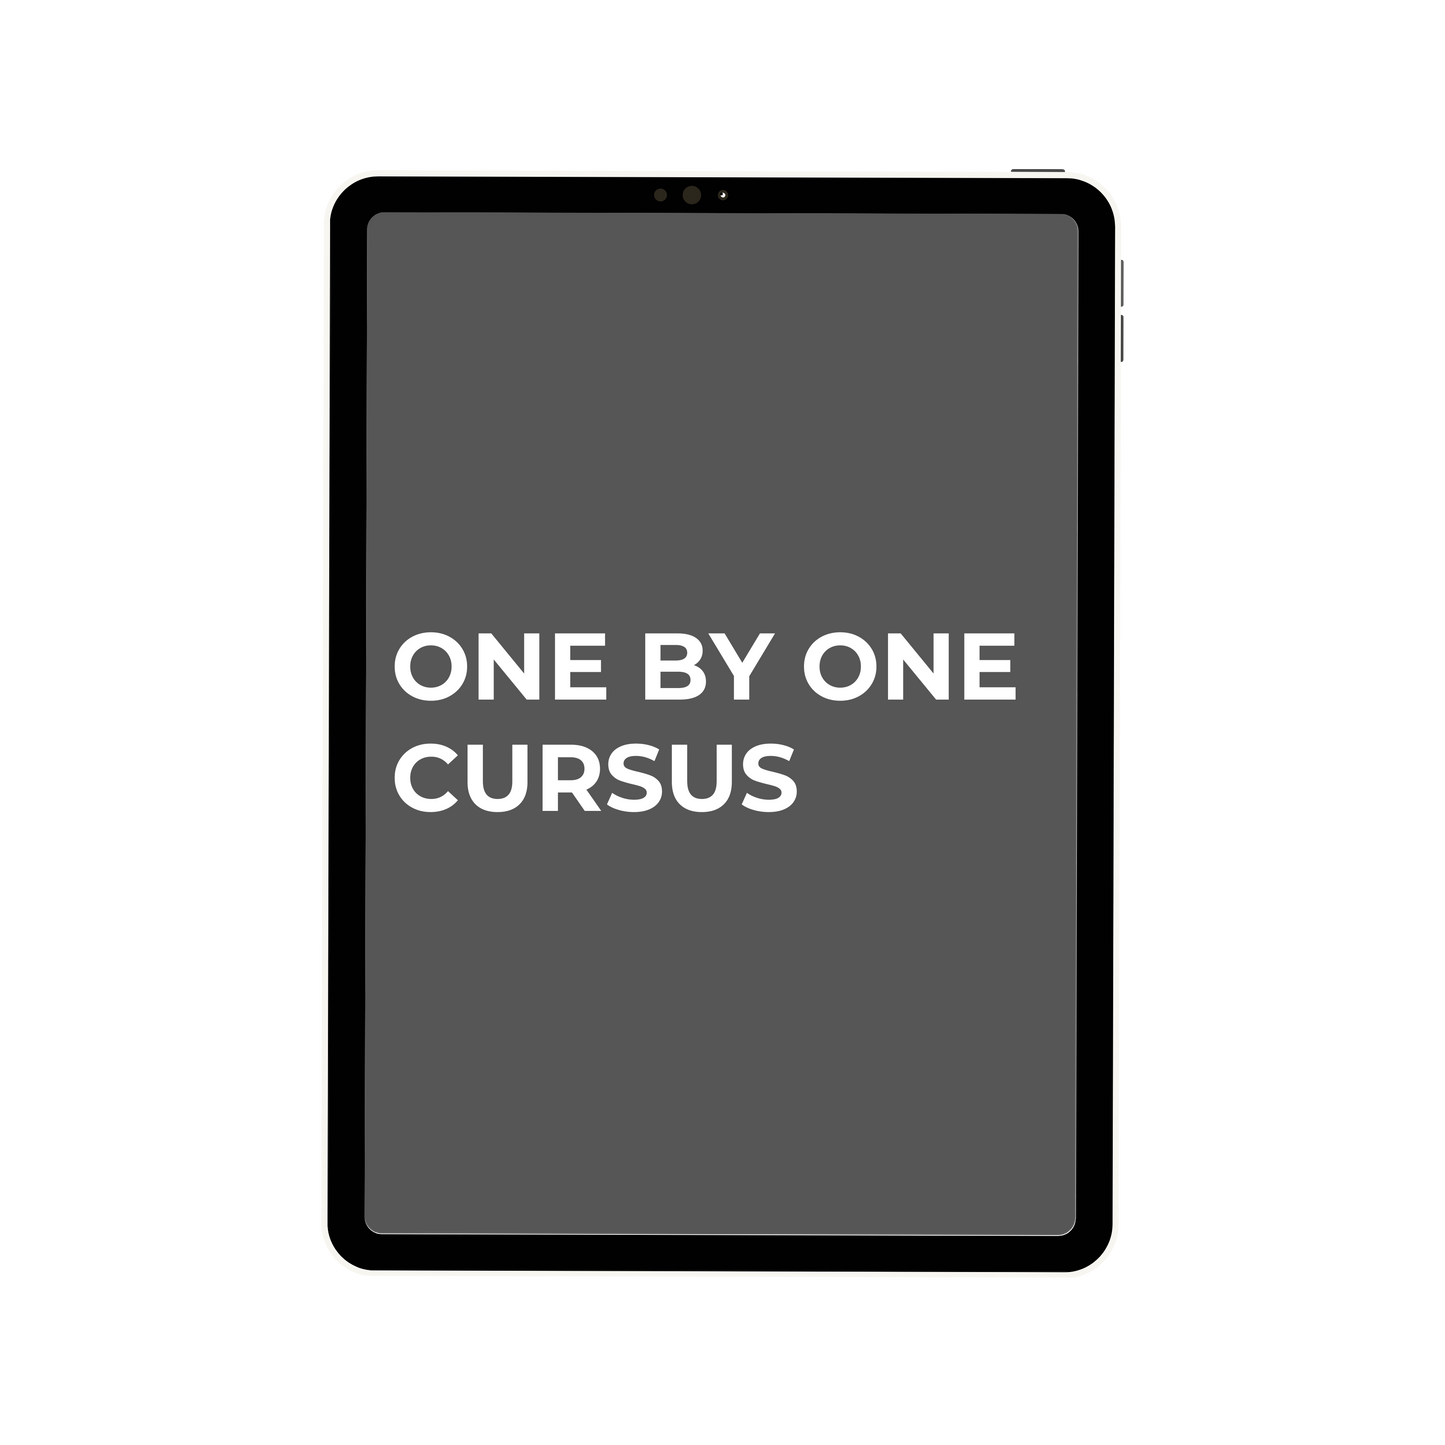 ONE BY ONE CURSUS